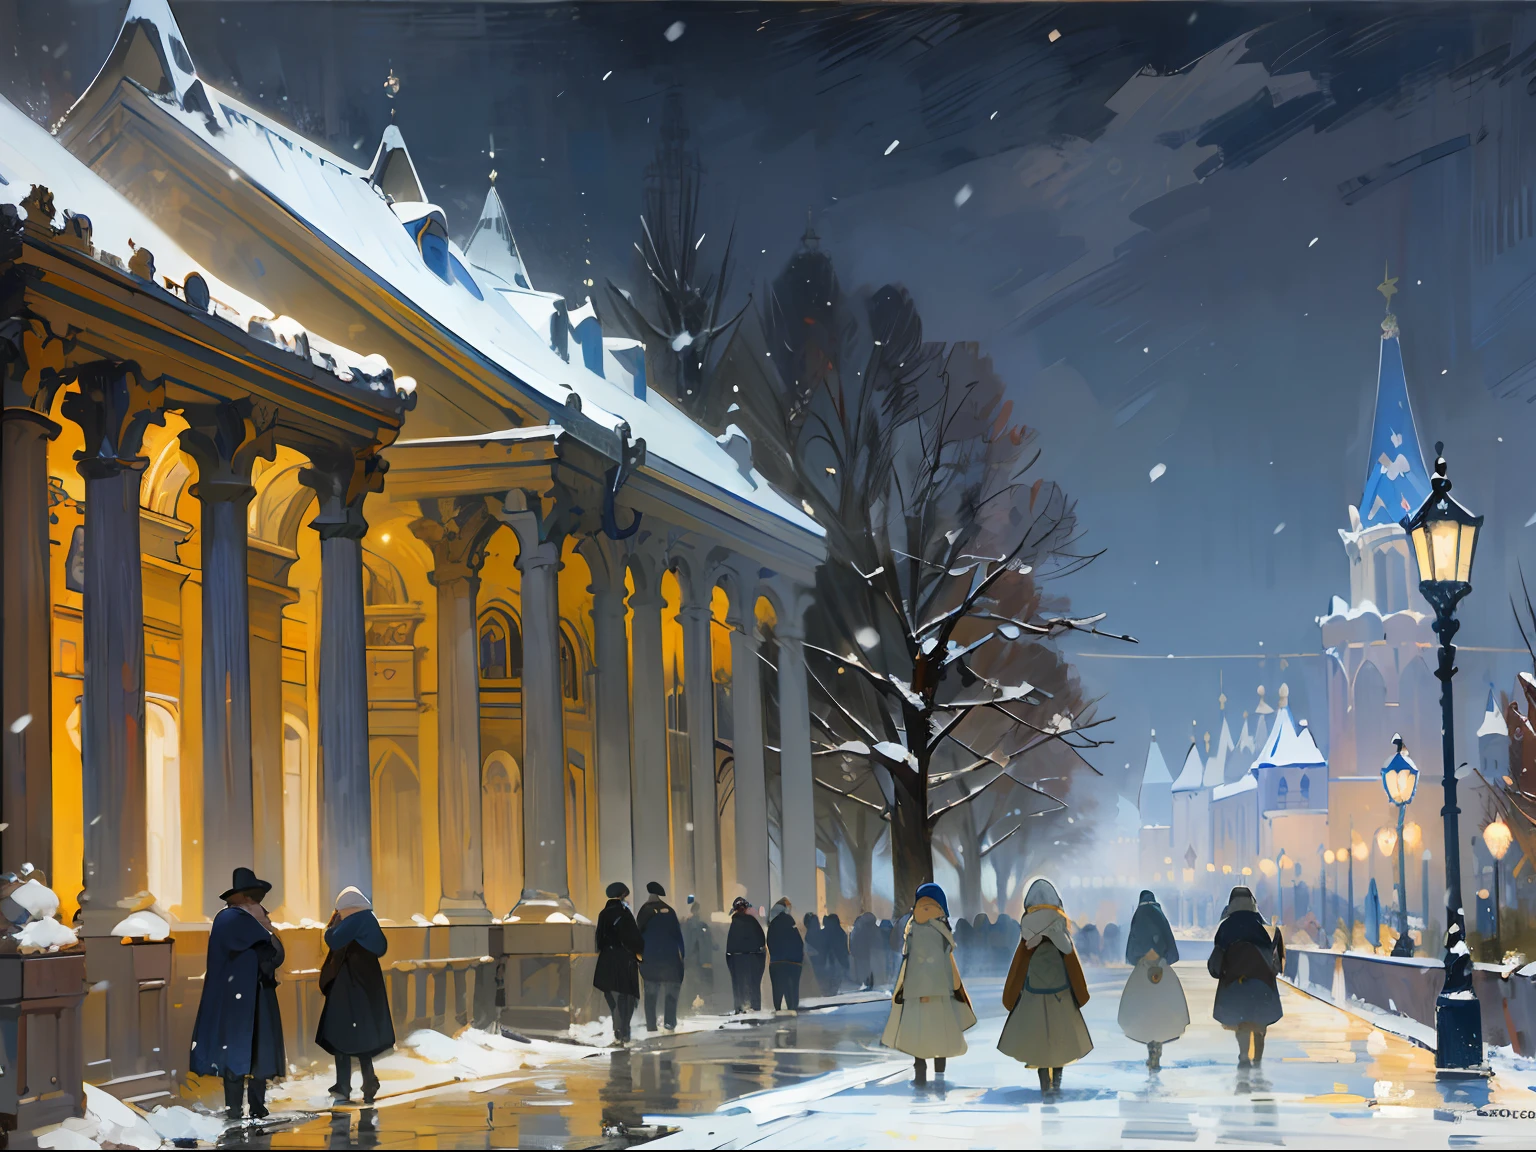 ((palace)), columns, ((night)), darkness, Evening, Lights, ((Russia)), ((19th century)), carriage, snowing, winter, (Renoir), (many), (oil painting), (Sketch)